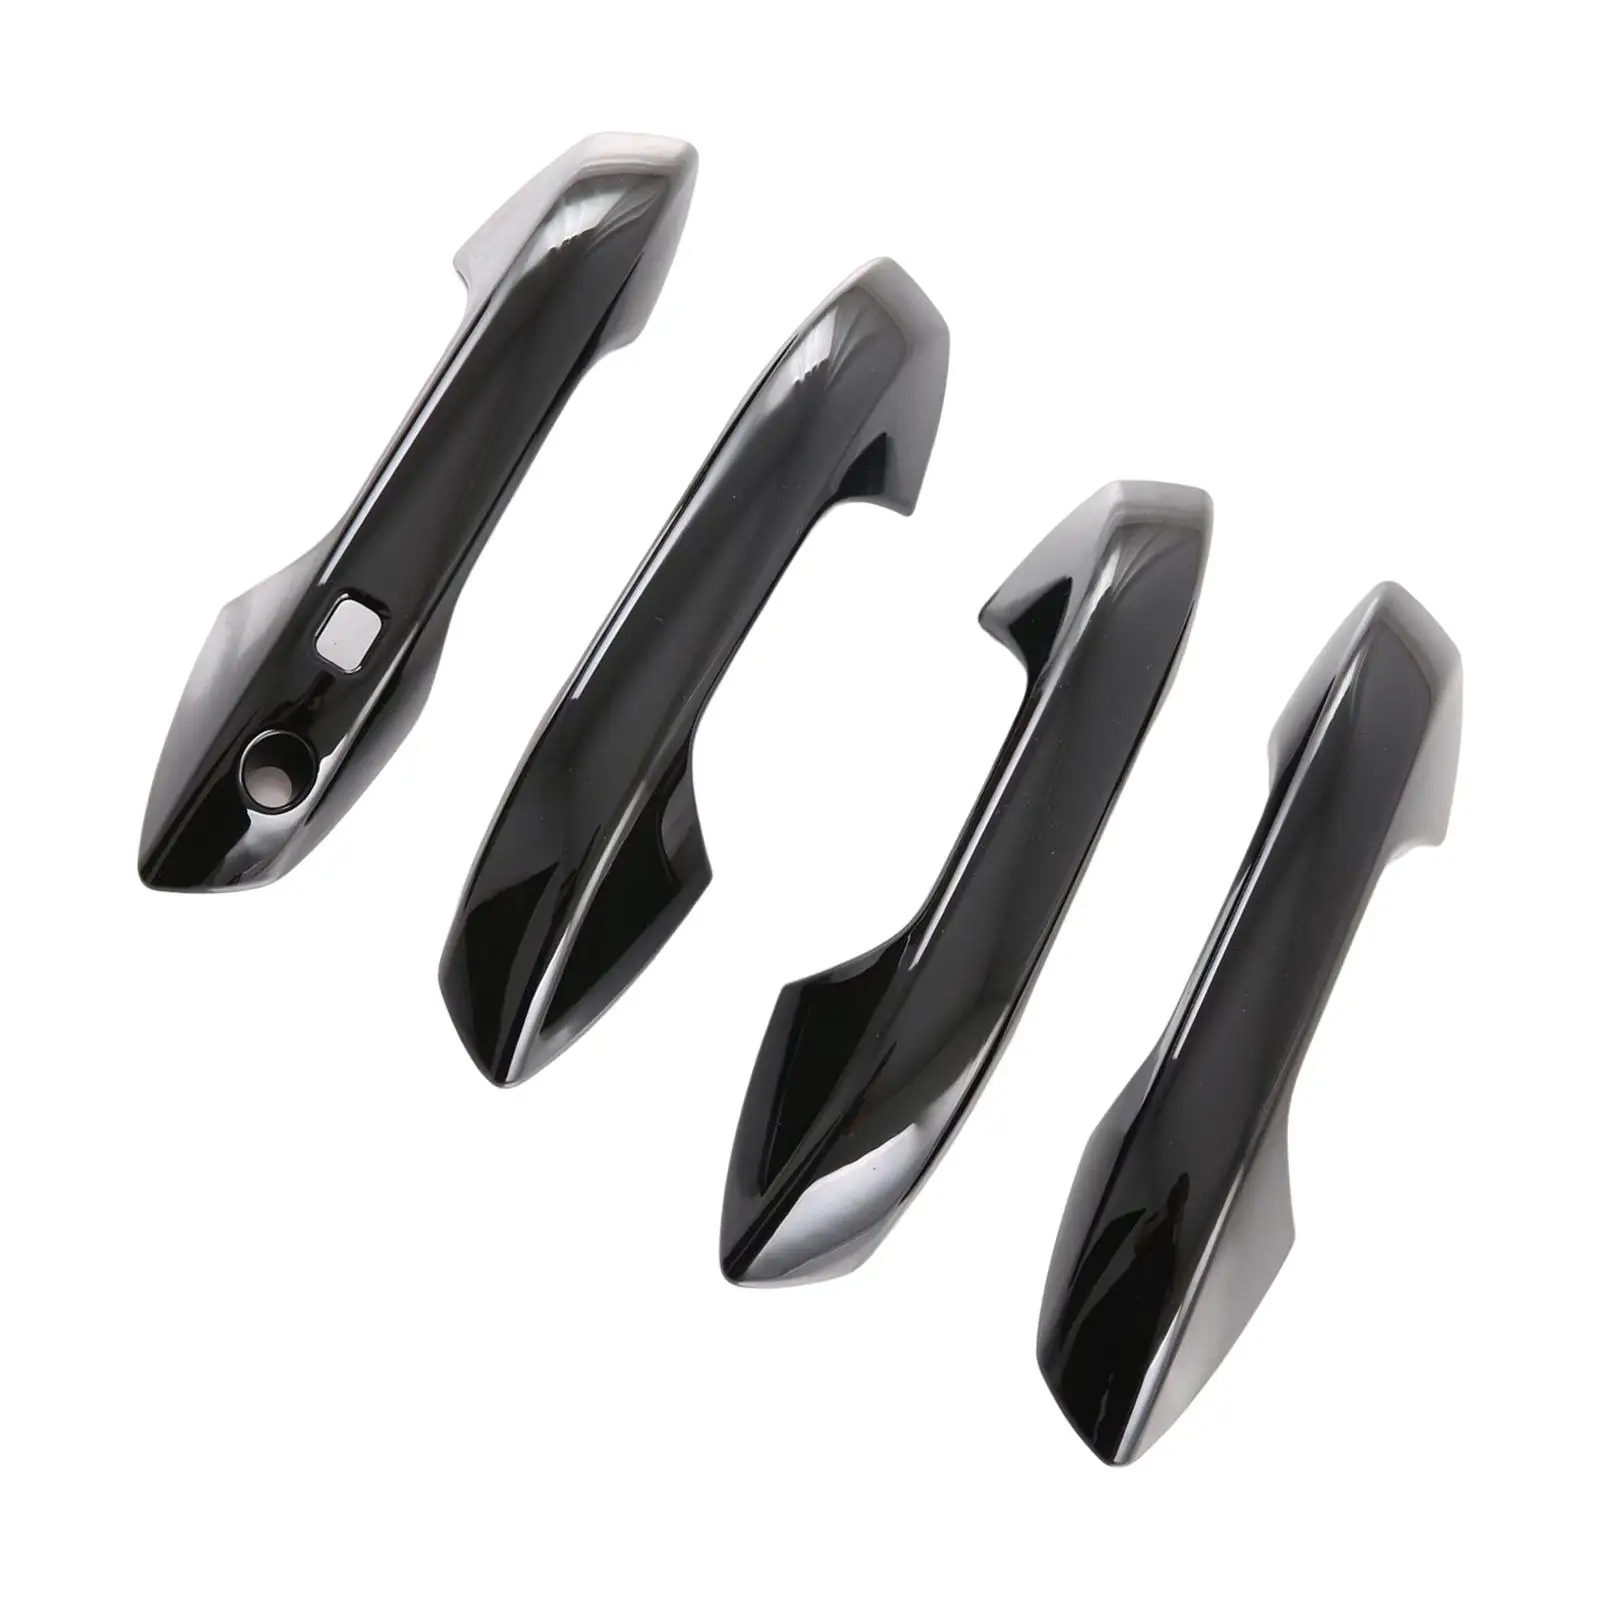 4x Auto Door Handle Protective Cover Trim Scratch Guard Spare Parts Replacement Car Accessories